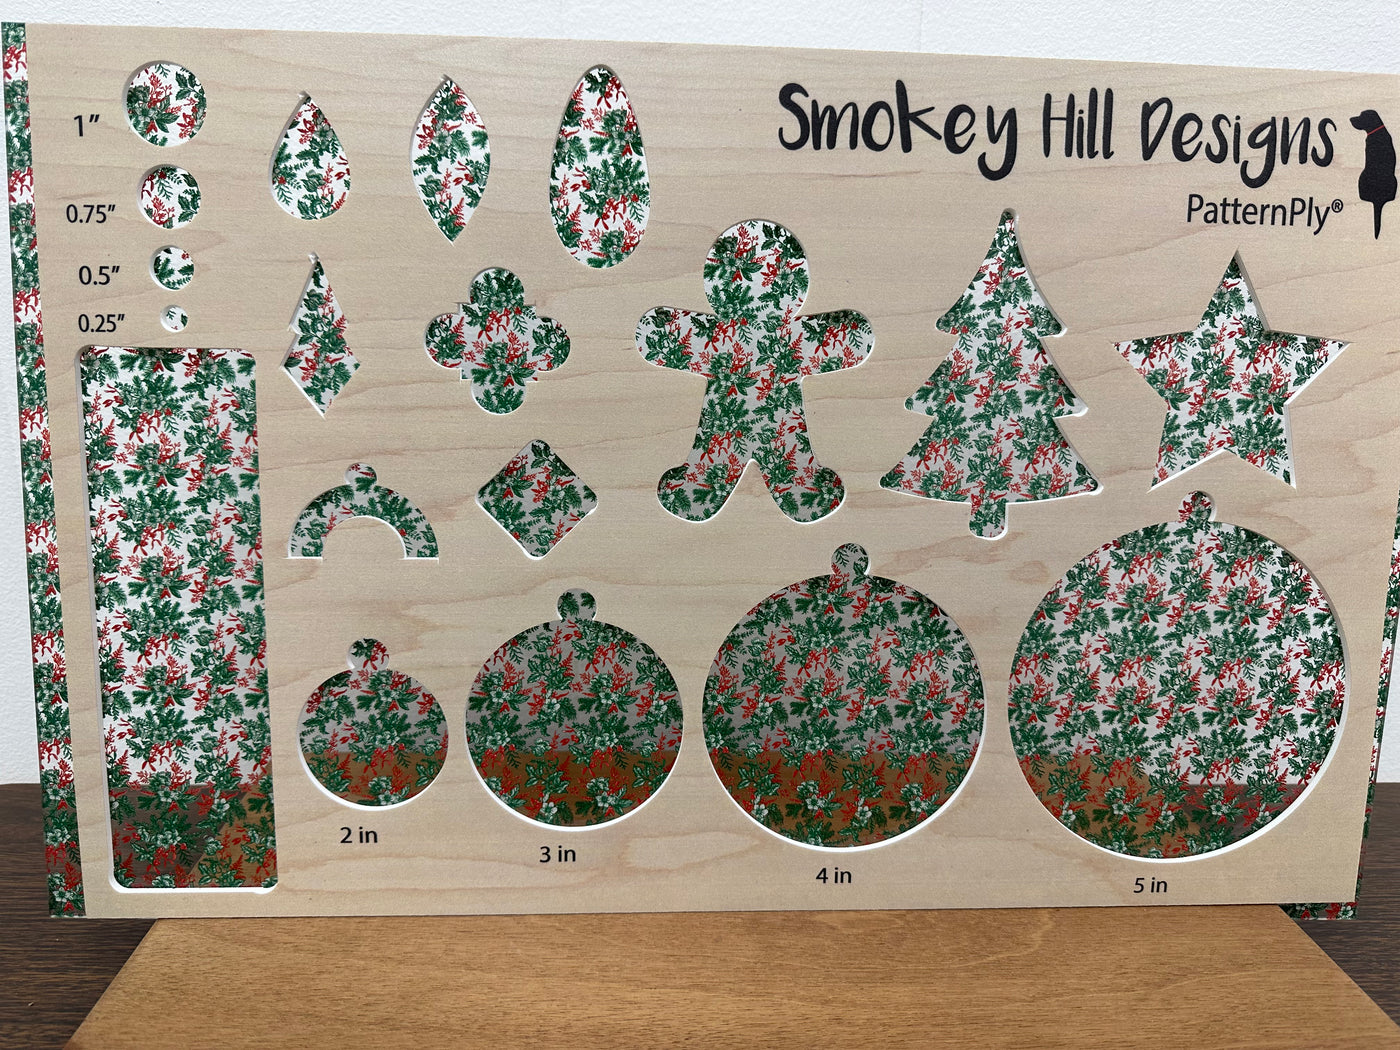 PatternPly® Scattered Red, White, and Green Vintage Christmas Floral